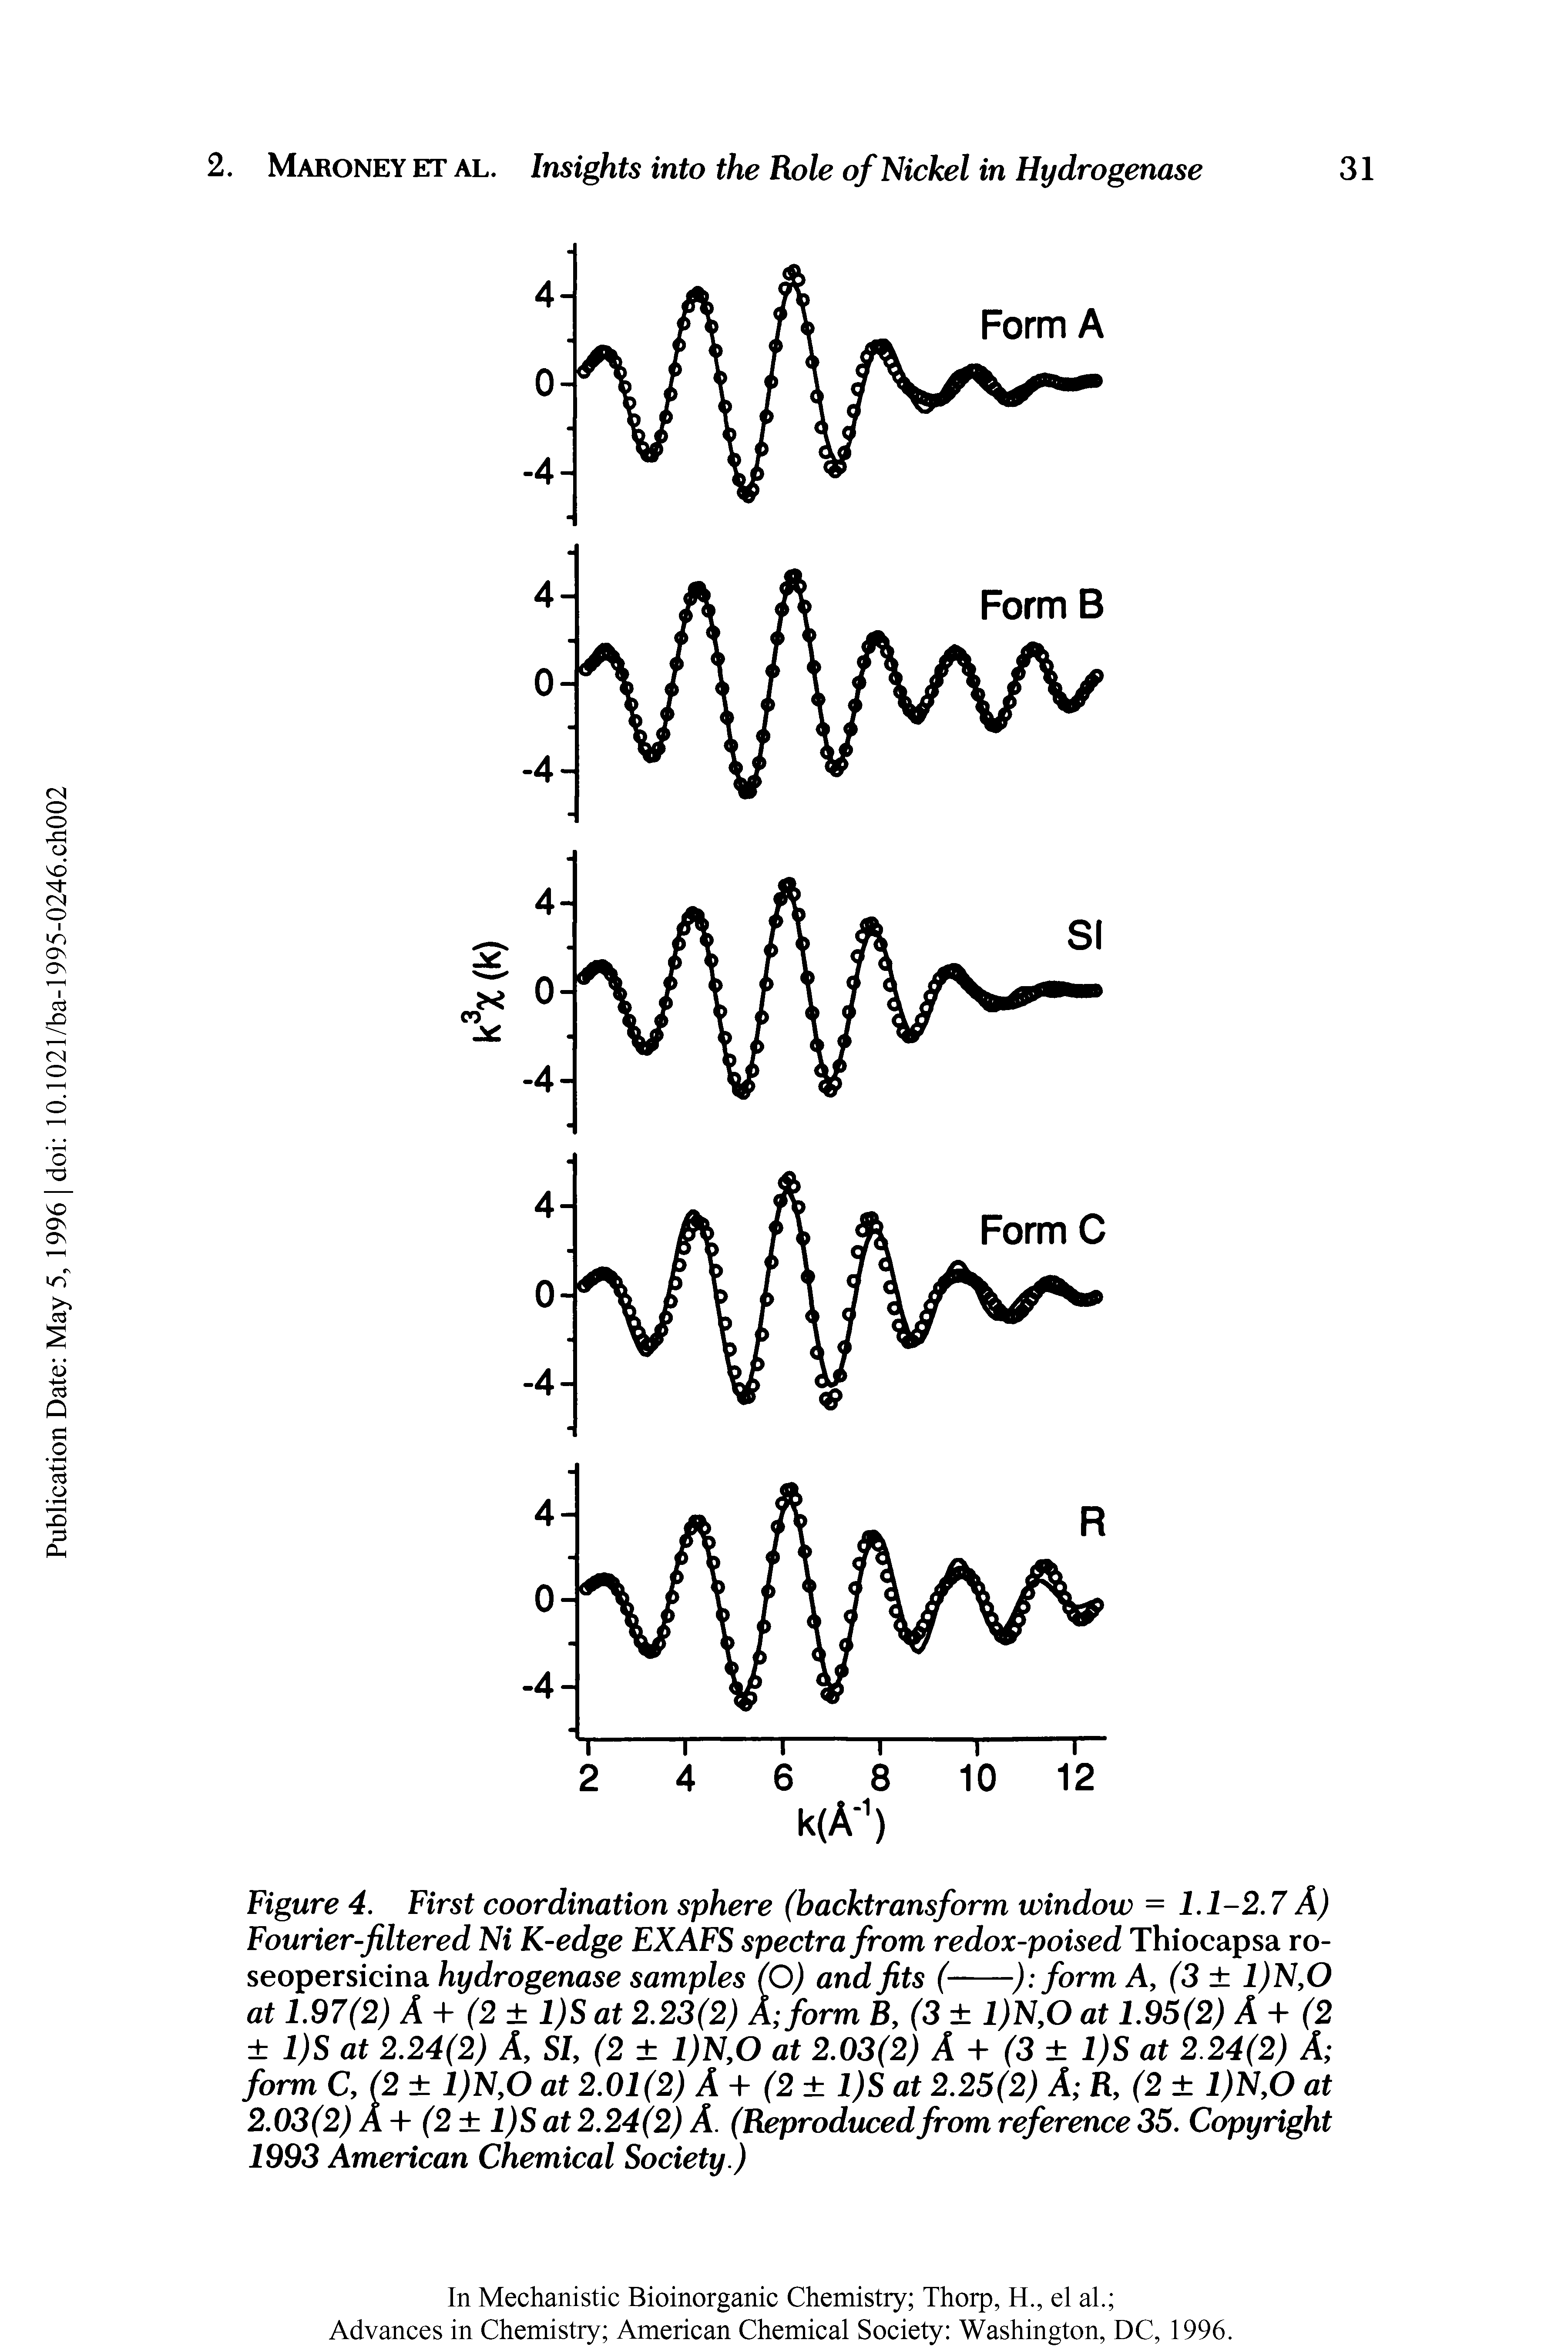 Figure 4. First coordination sphere (backtransform window = 1.1-2.7 A) Fourier-filtered Ni K-edge EXAFS spectra from redox-poised Thiocapsa ro-...